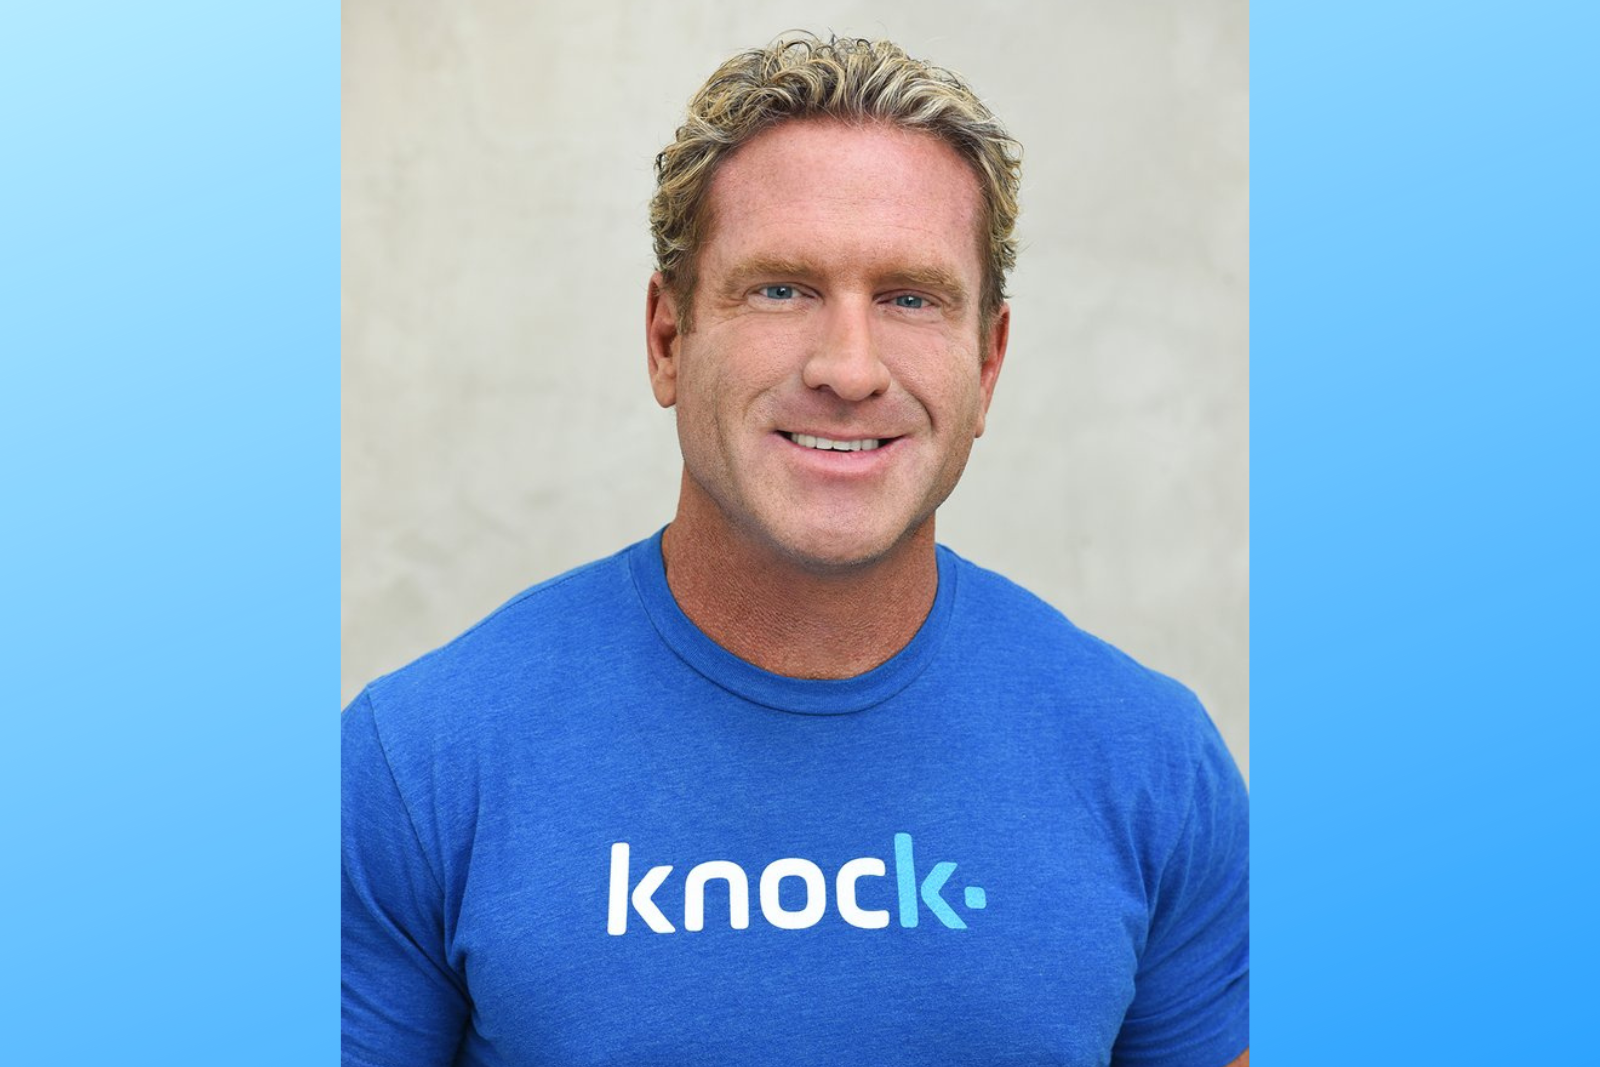 CEO Of Knock Talks About Crowdfunding Campaign